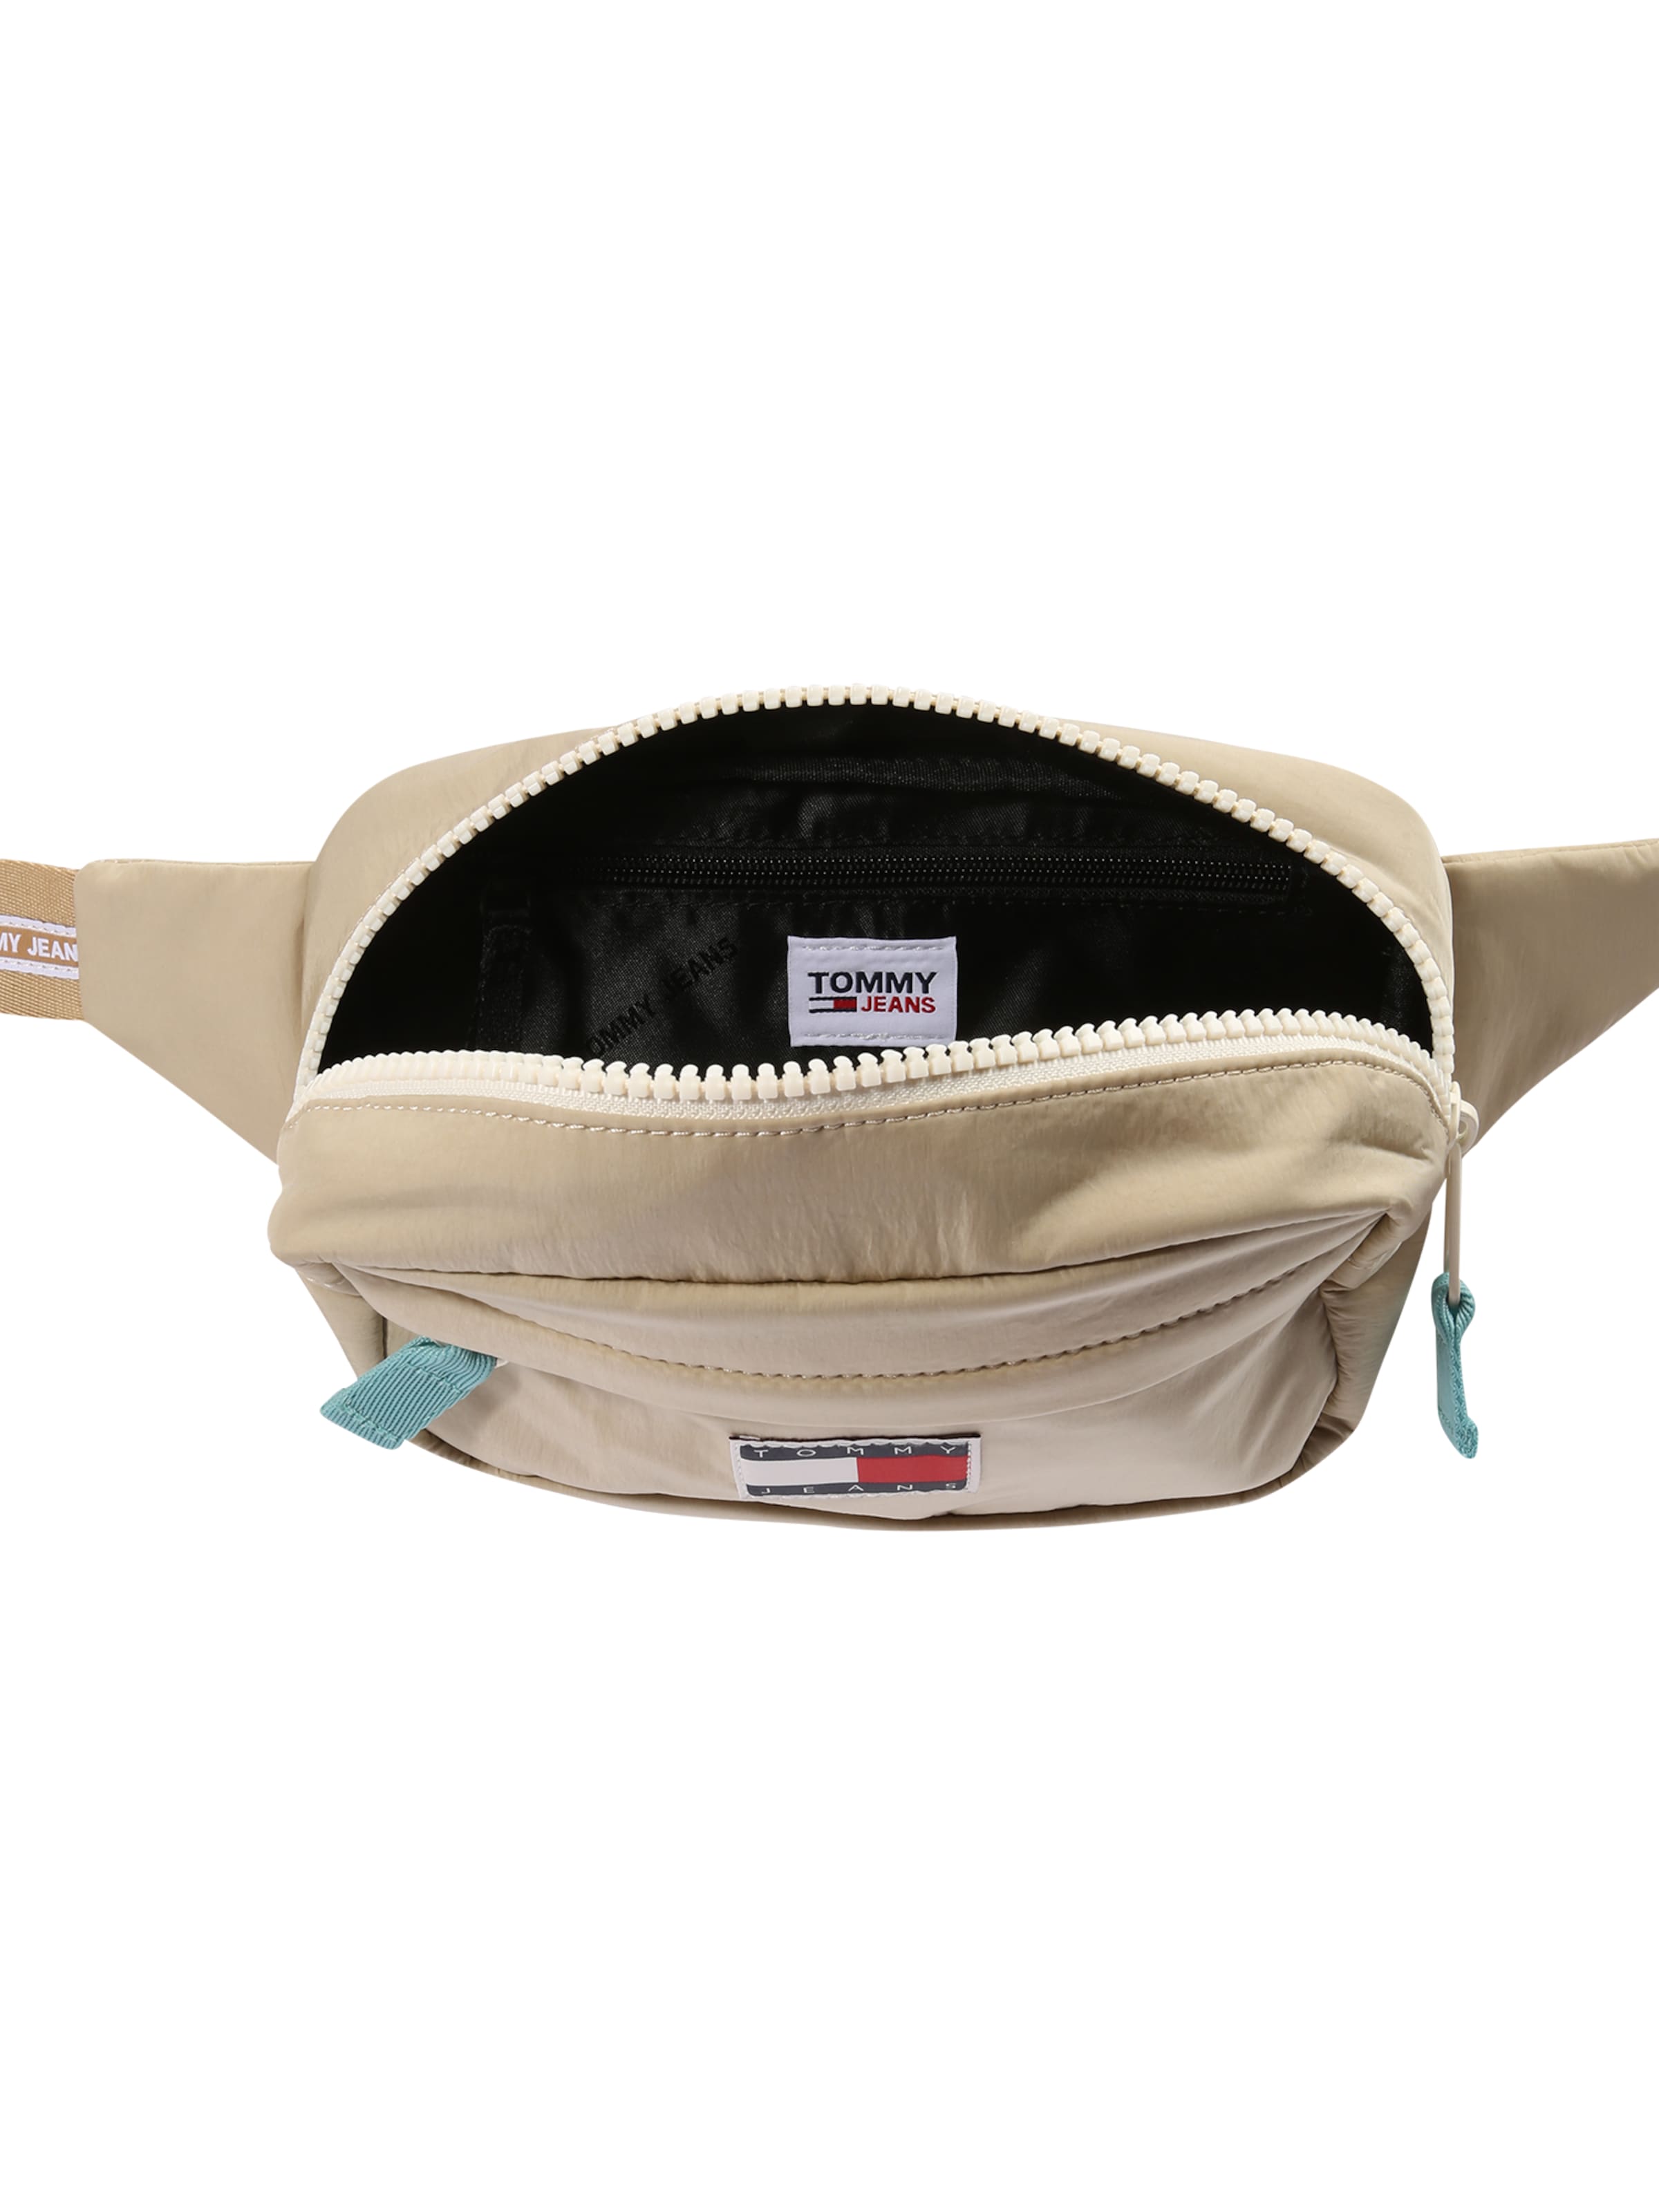 Men Bags & backpacks | Tommy Jeans Fanny Pack in Beige - AD02522